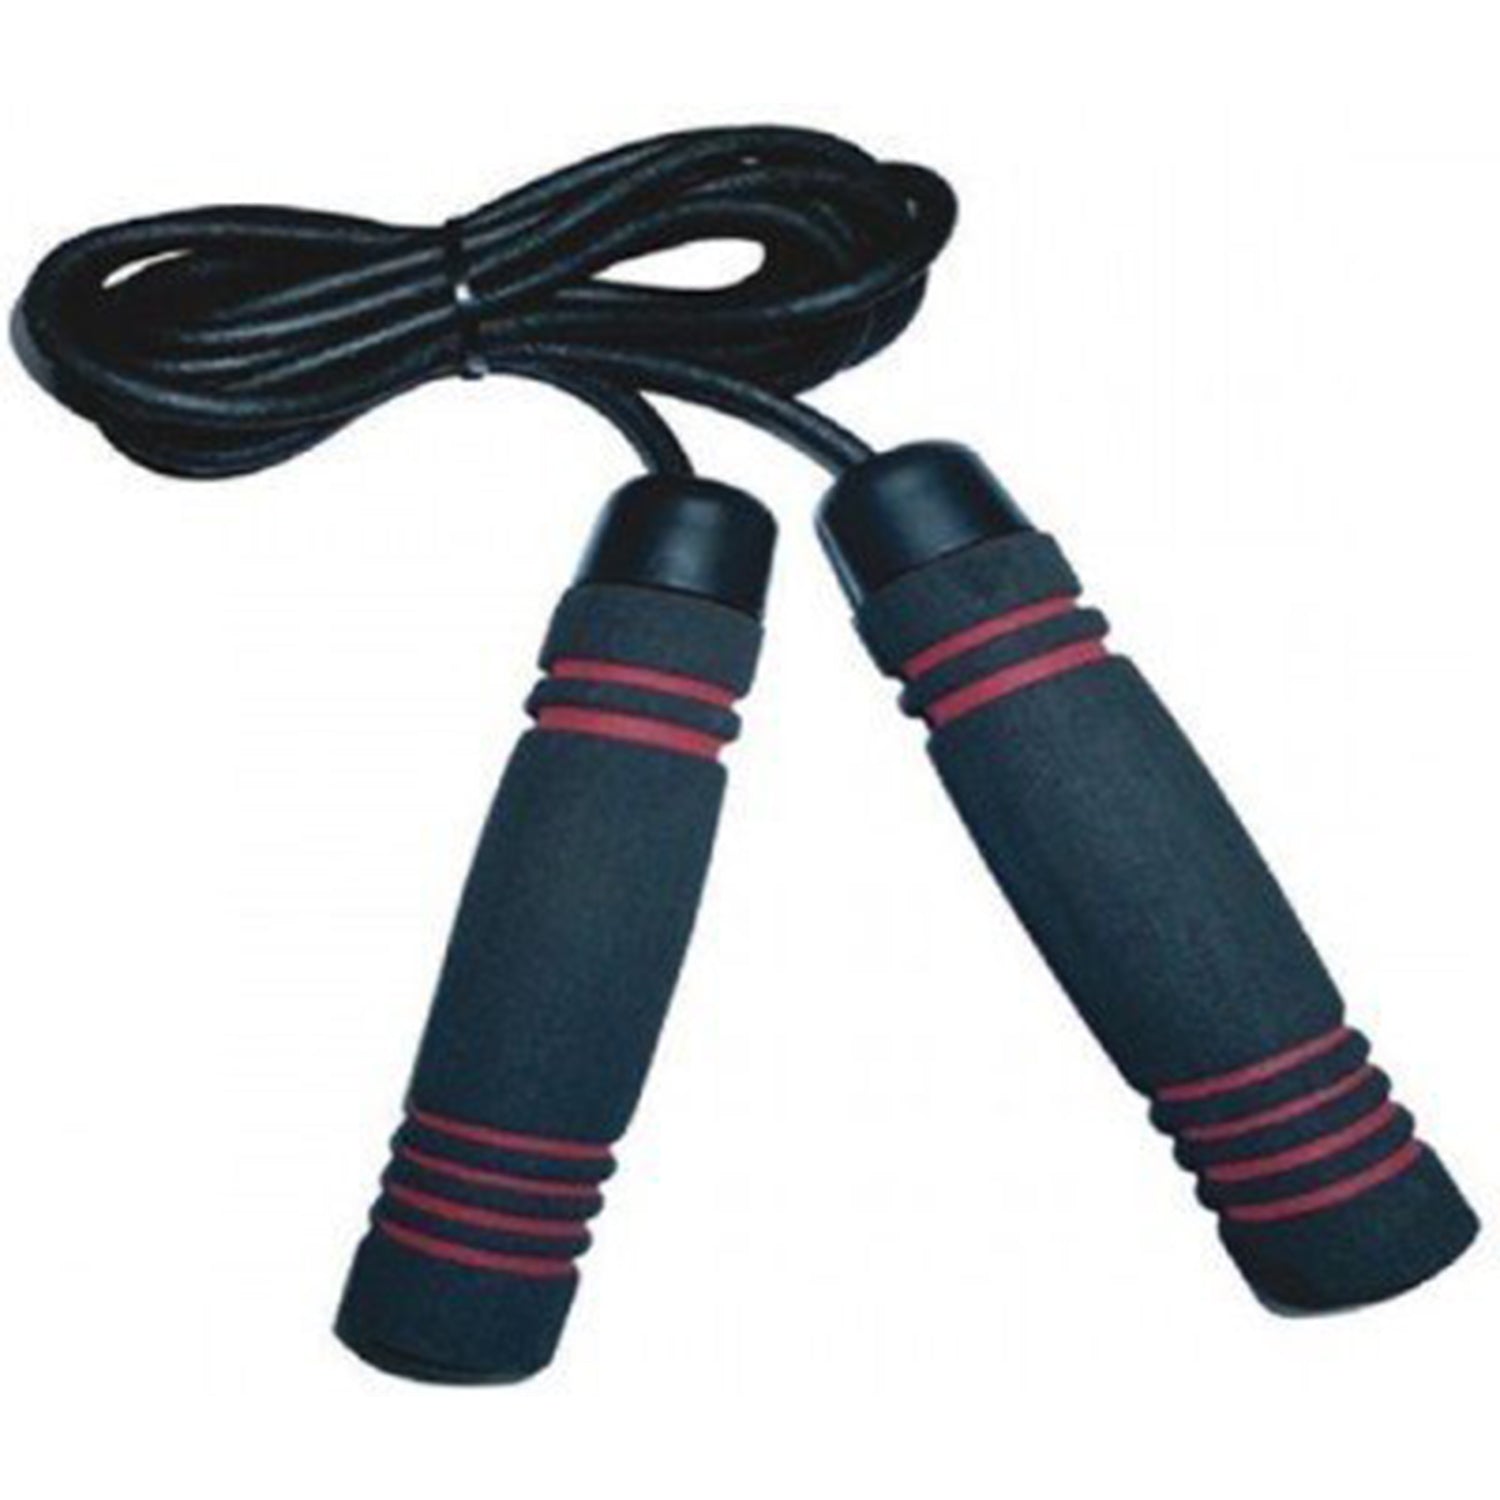 Vector X JF-1610 Freestyle Skipping Rope - Best Price online Prokicksports.com